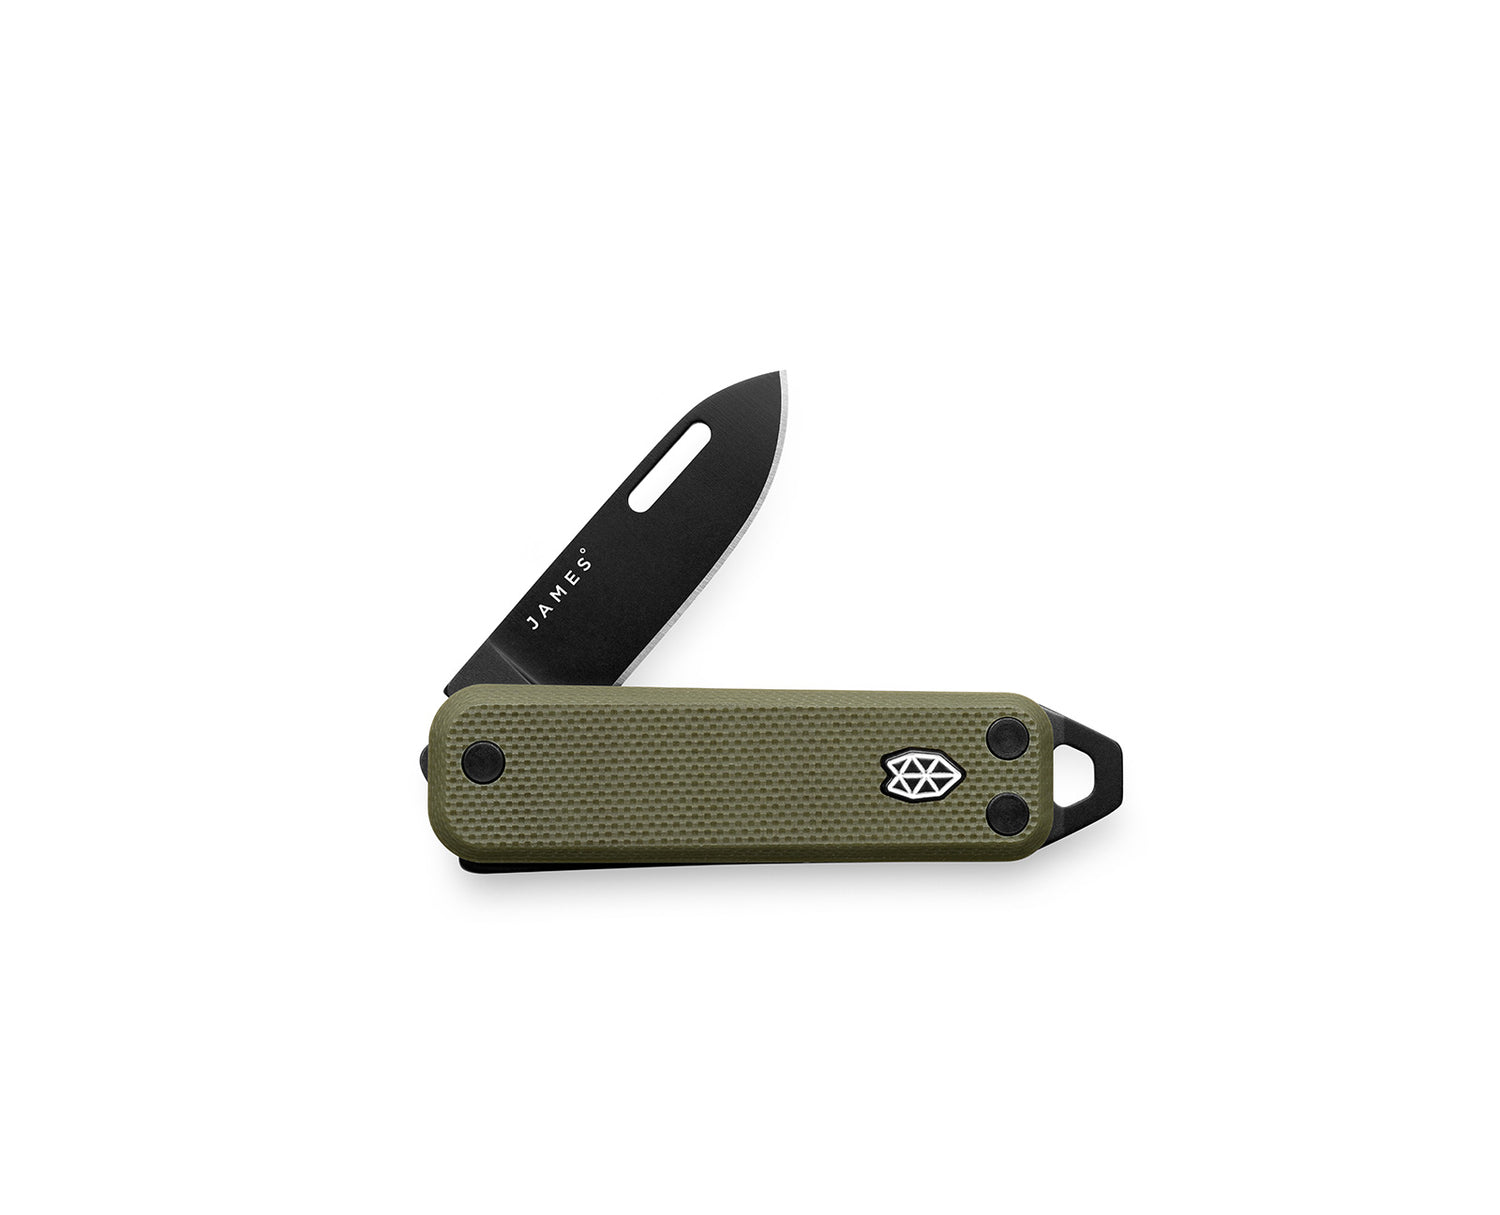 The Elko knife with OD green handle and black blade.